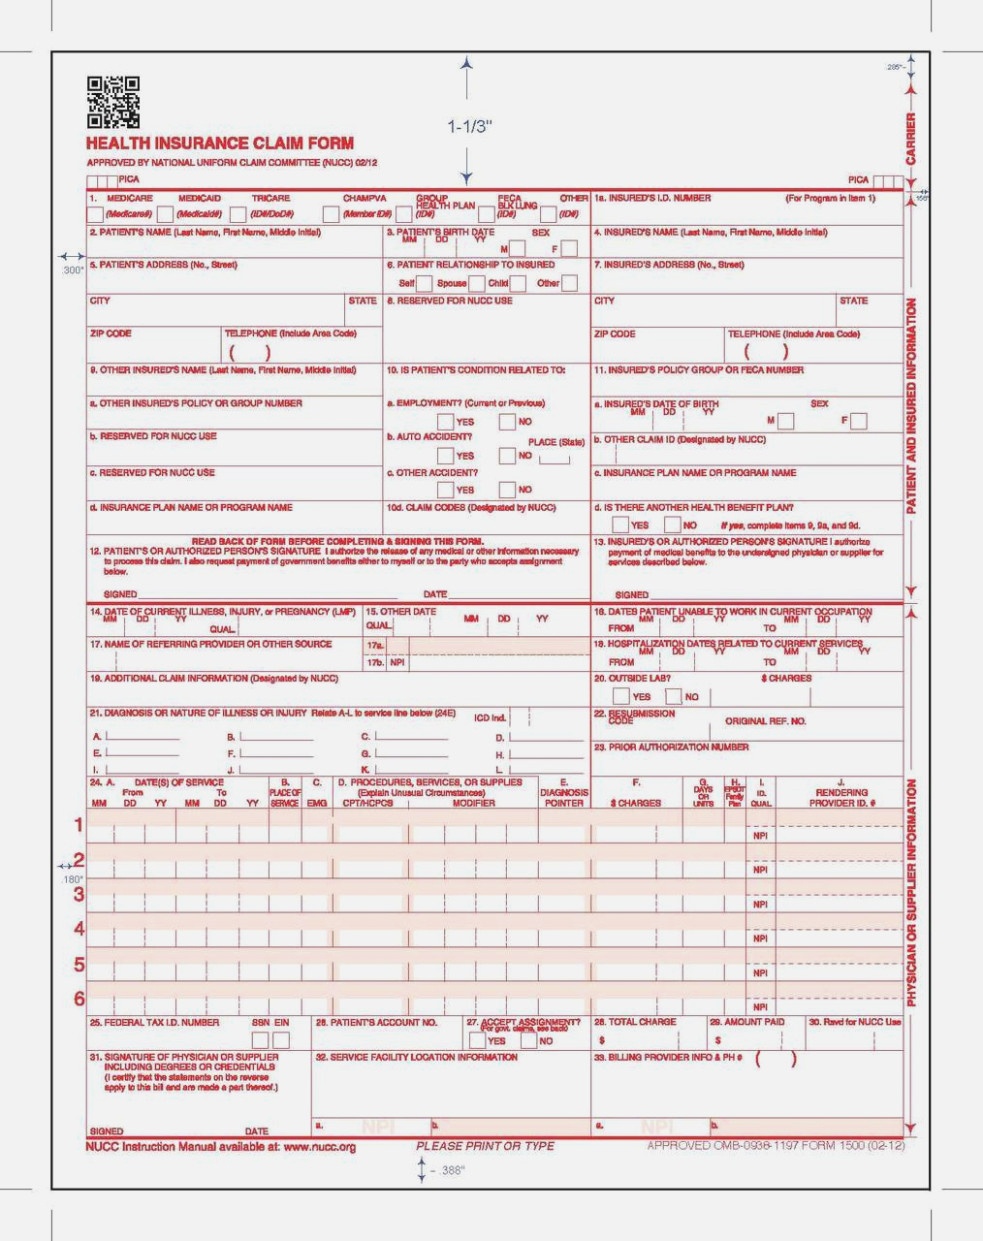 New Cms-15 (15/15) Claim Form – Free Shipping – Cms 1500 Form 02 12 - Free Printable Cms 1500 Form 02 12